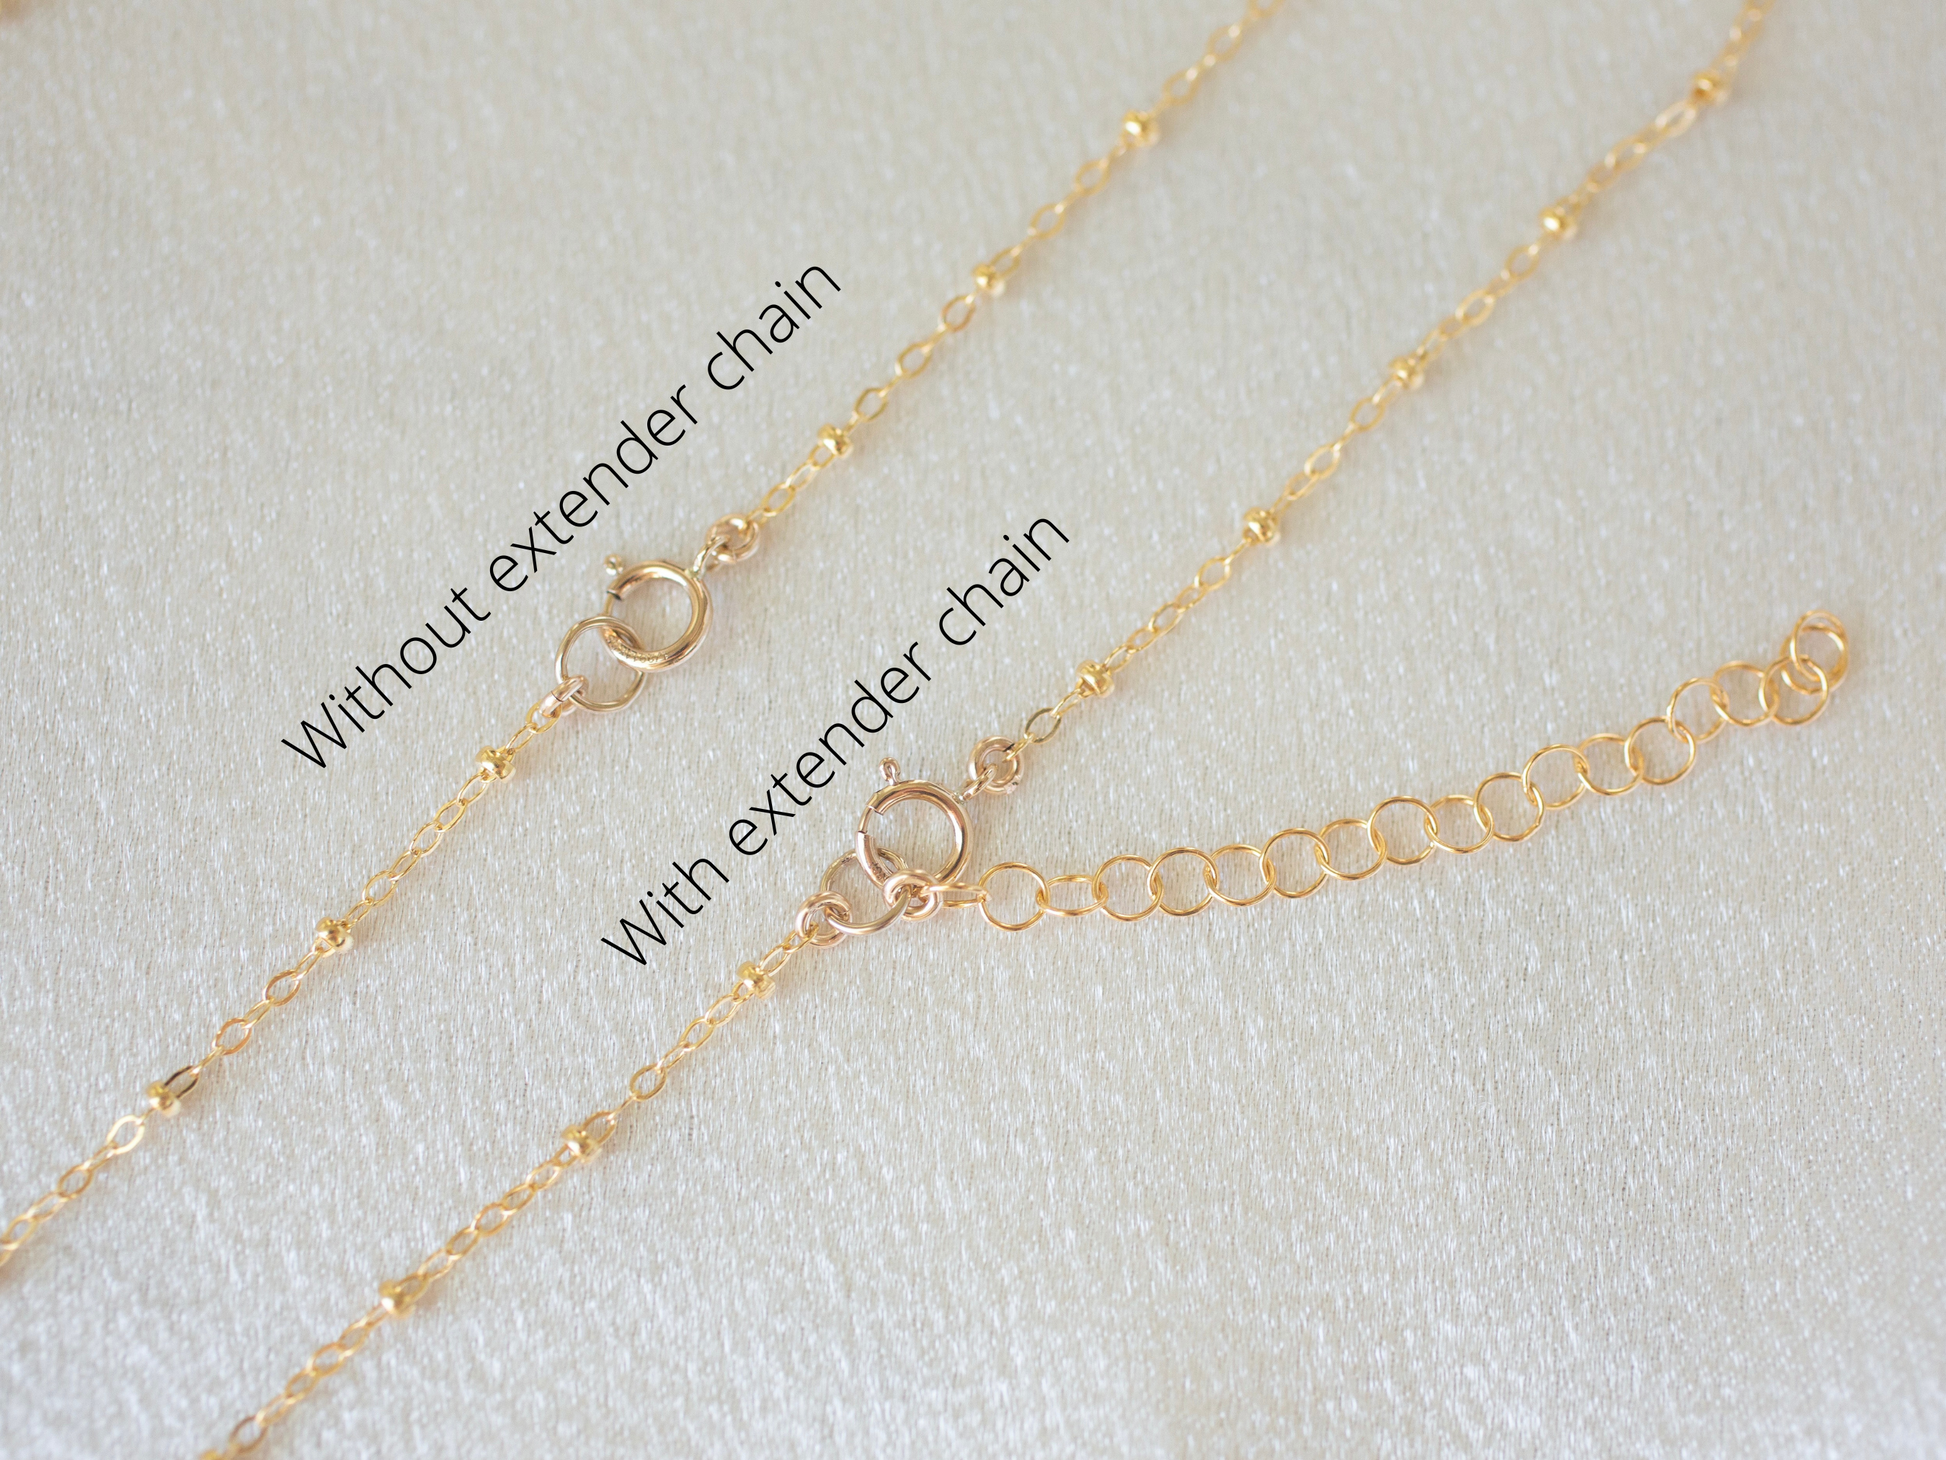 Gold Filled Figure 8 Chain Length Extender for Necklace or